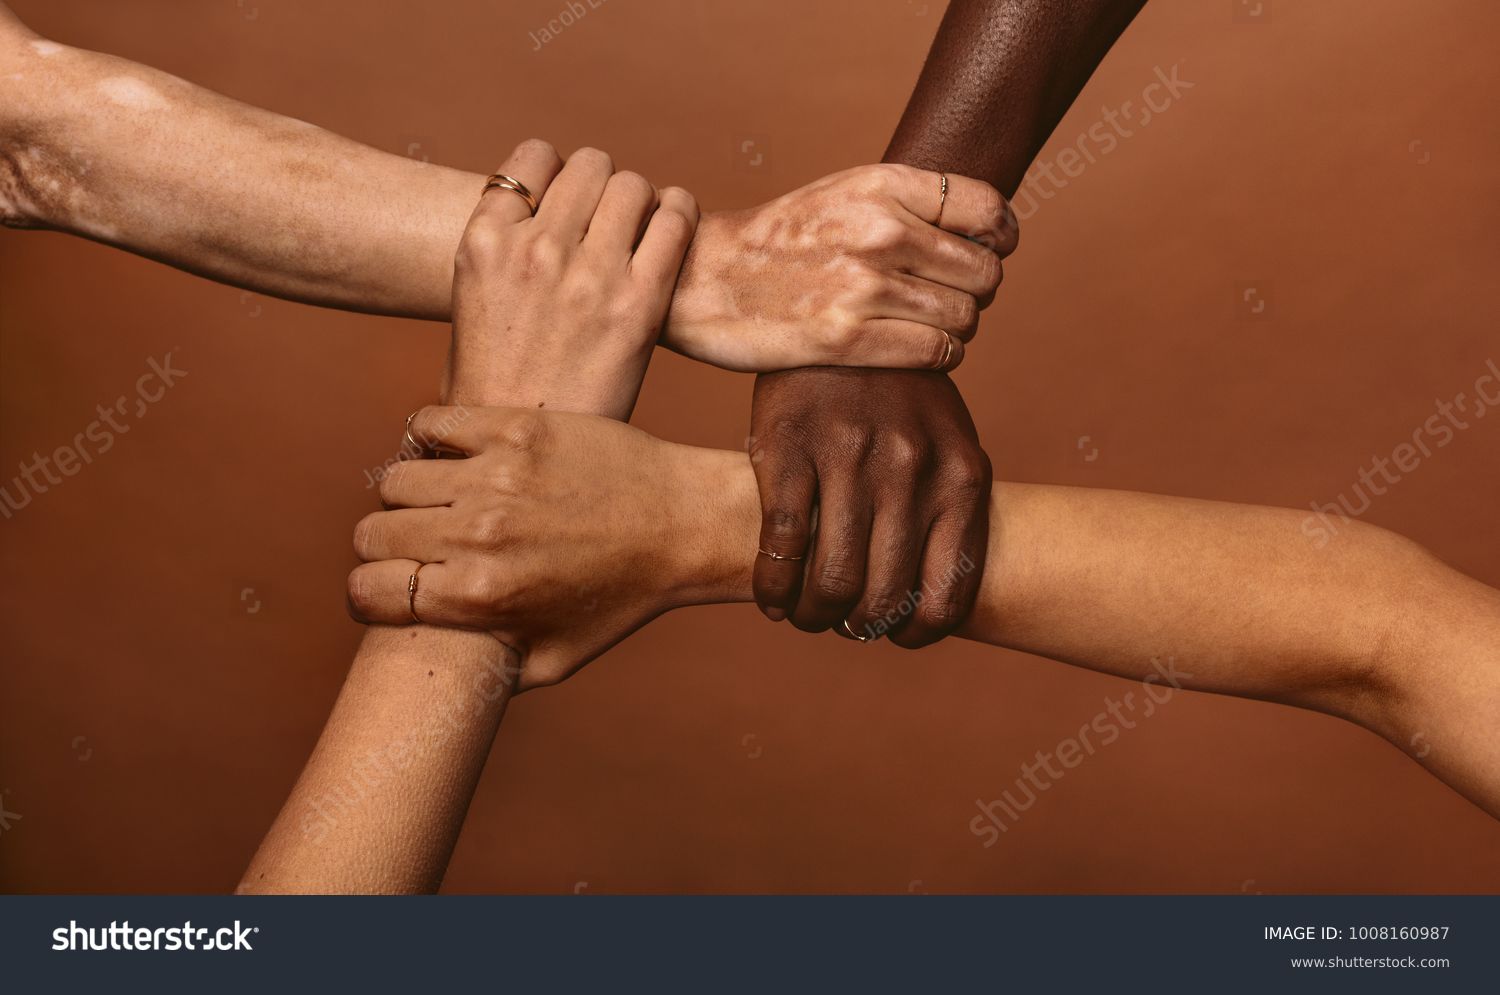 Four diverse women holding each others wrists in a circle. Top view of female hands linked in the lock against brown background. #1008160987